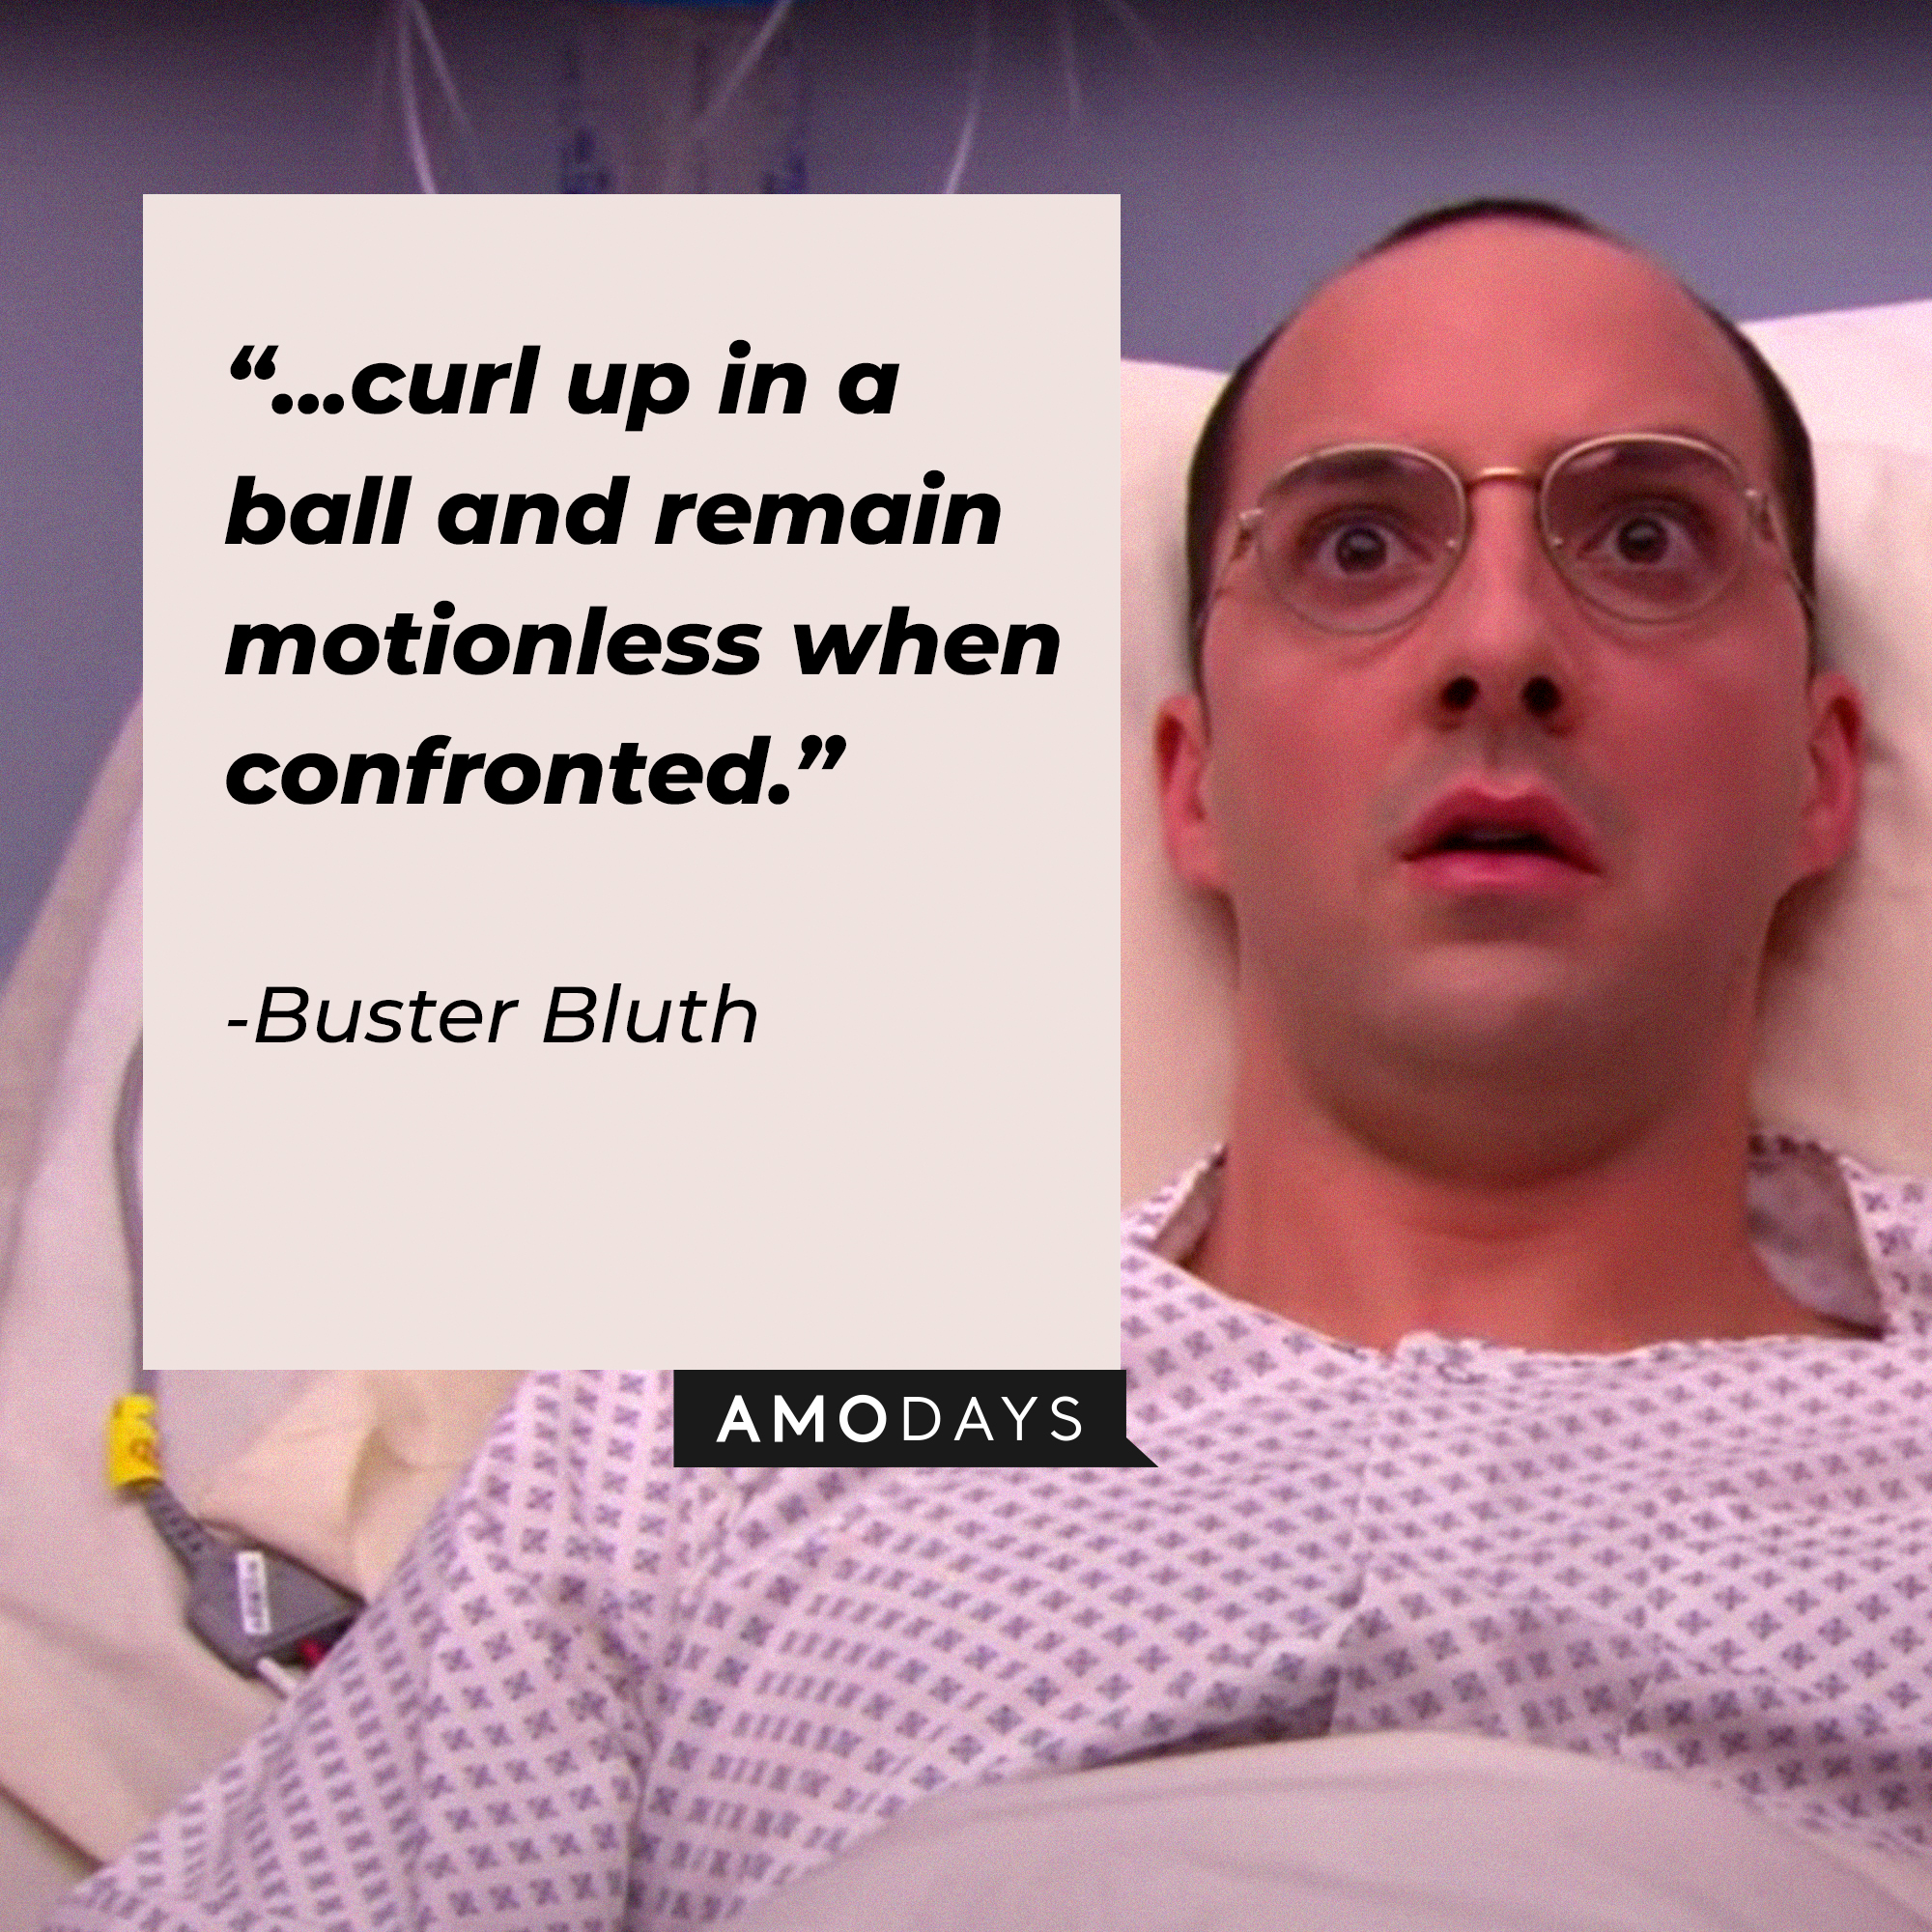 Buster Bluth, with his quote: “...curl up in a ball and remain motionless when confronted.” | Source: youtube.com/arresteddev